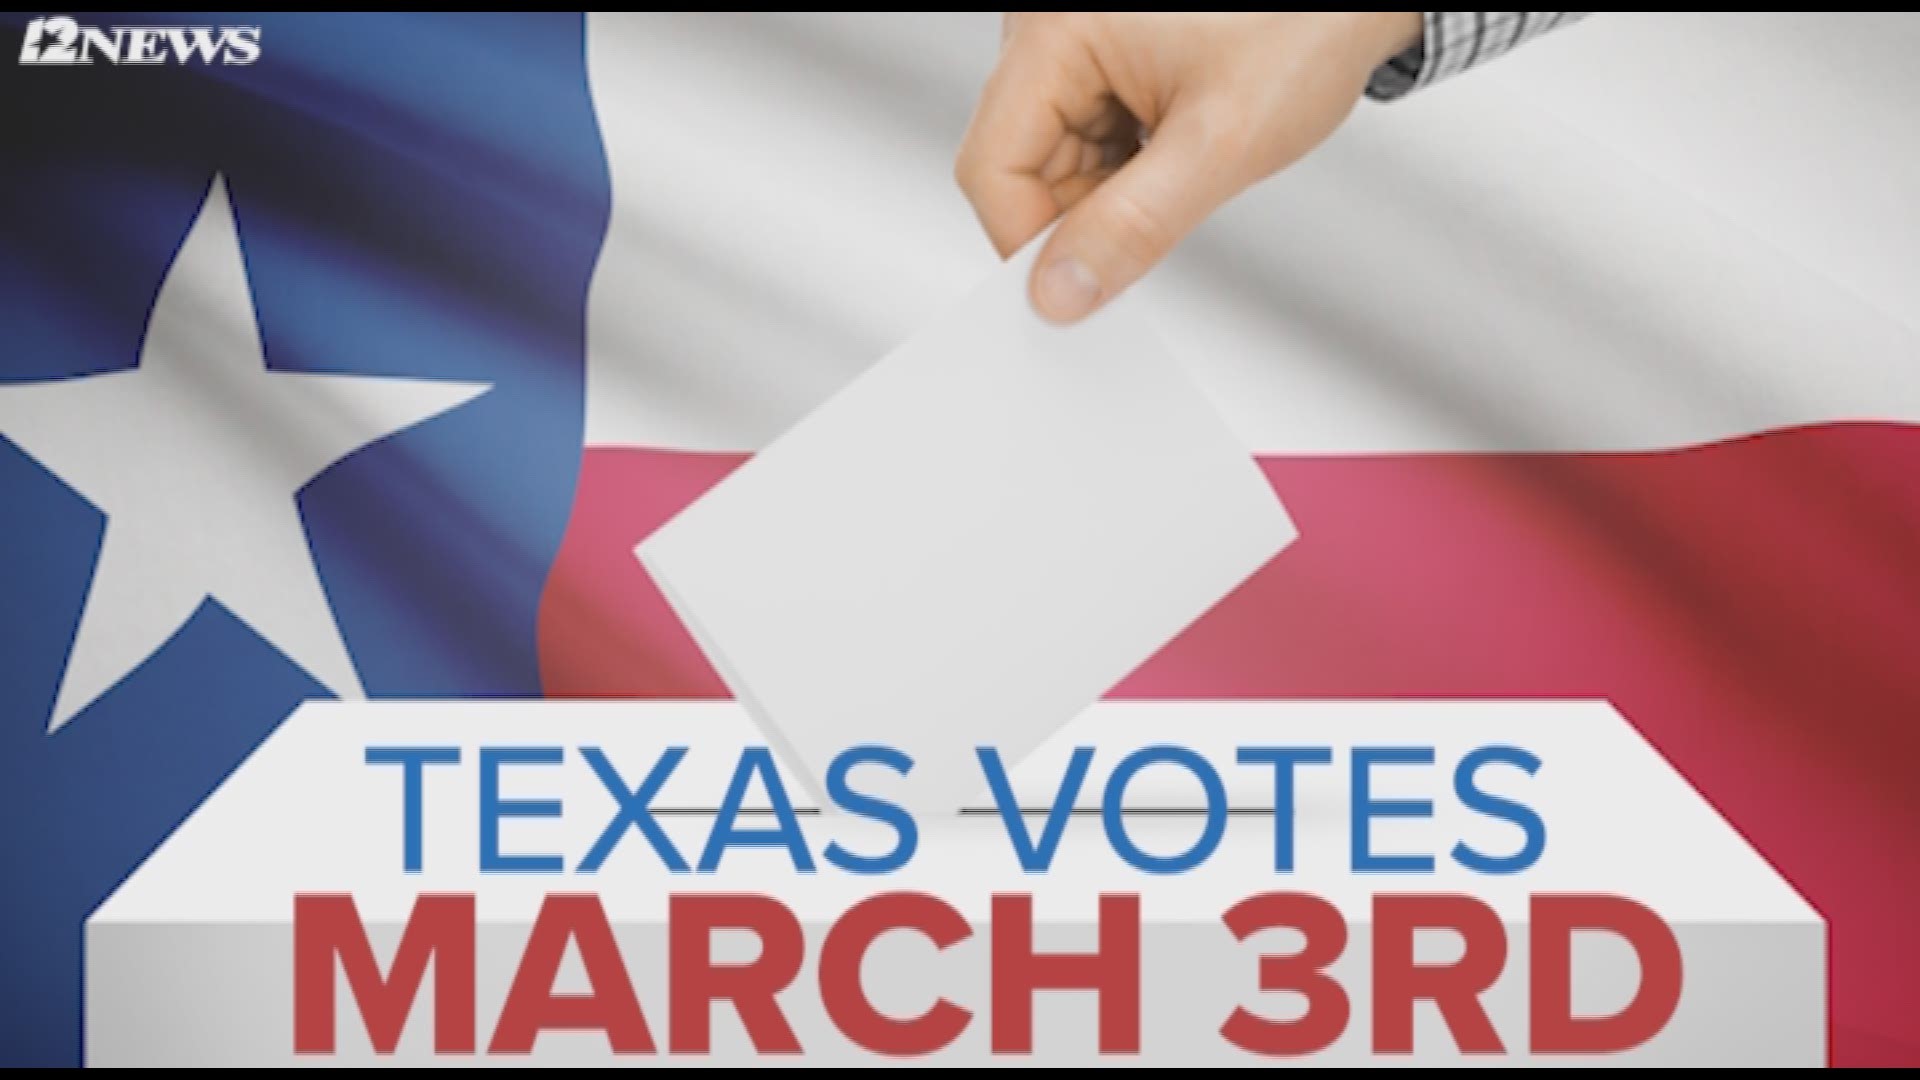 Texas joins 13 other states in voting on Super Tuesday. In addition to the presidential primary, the balance of power in Austin is at stake for the GOP.